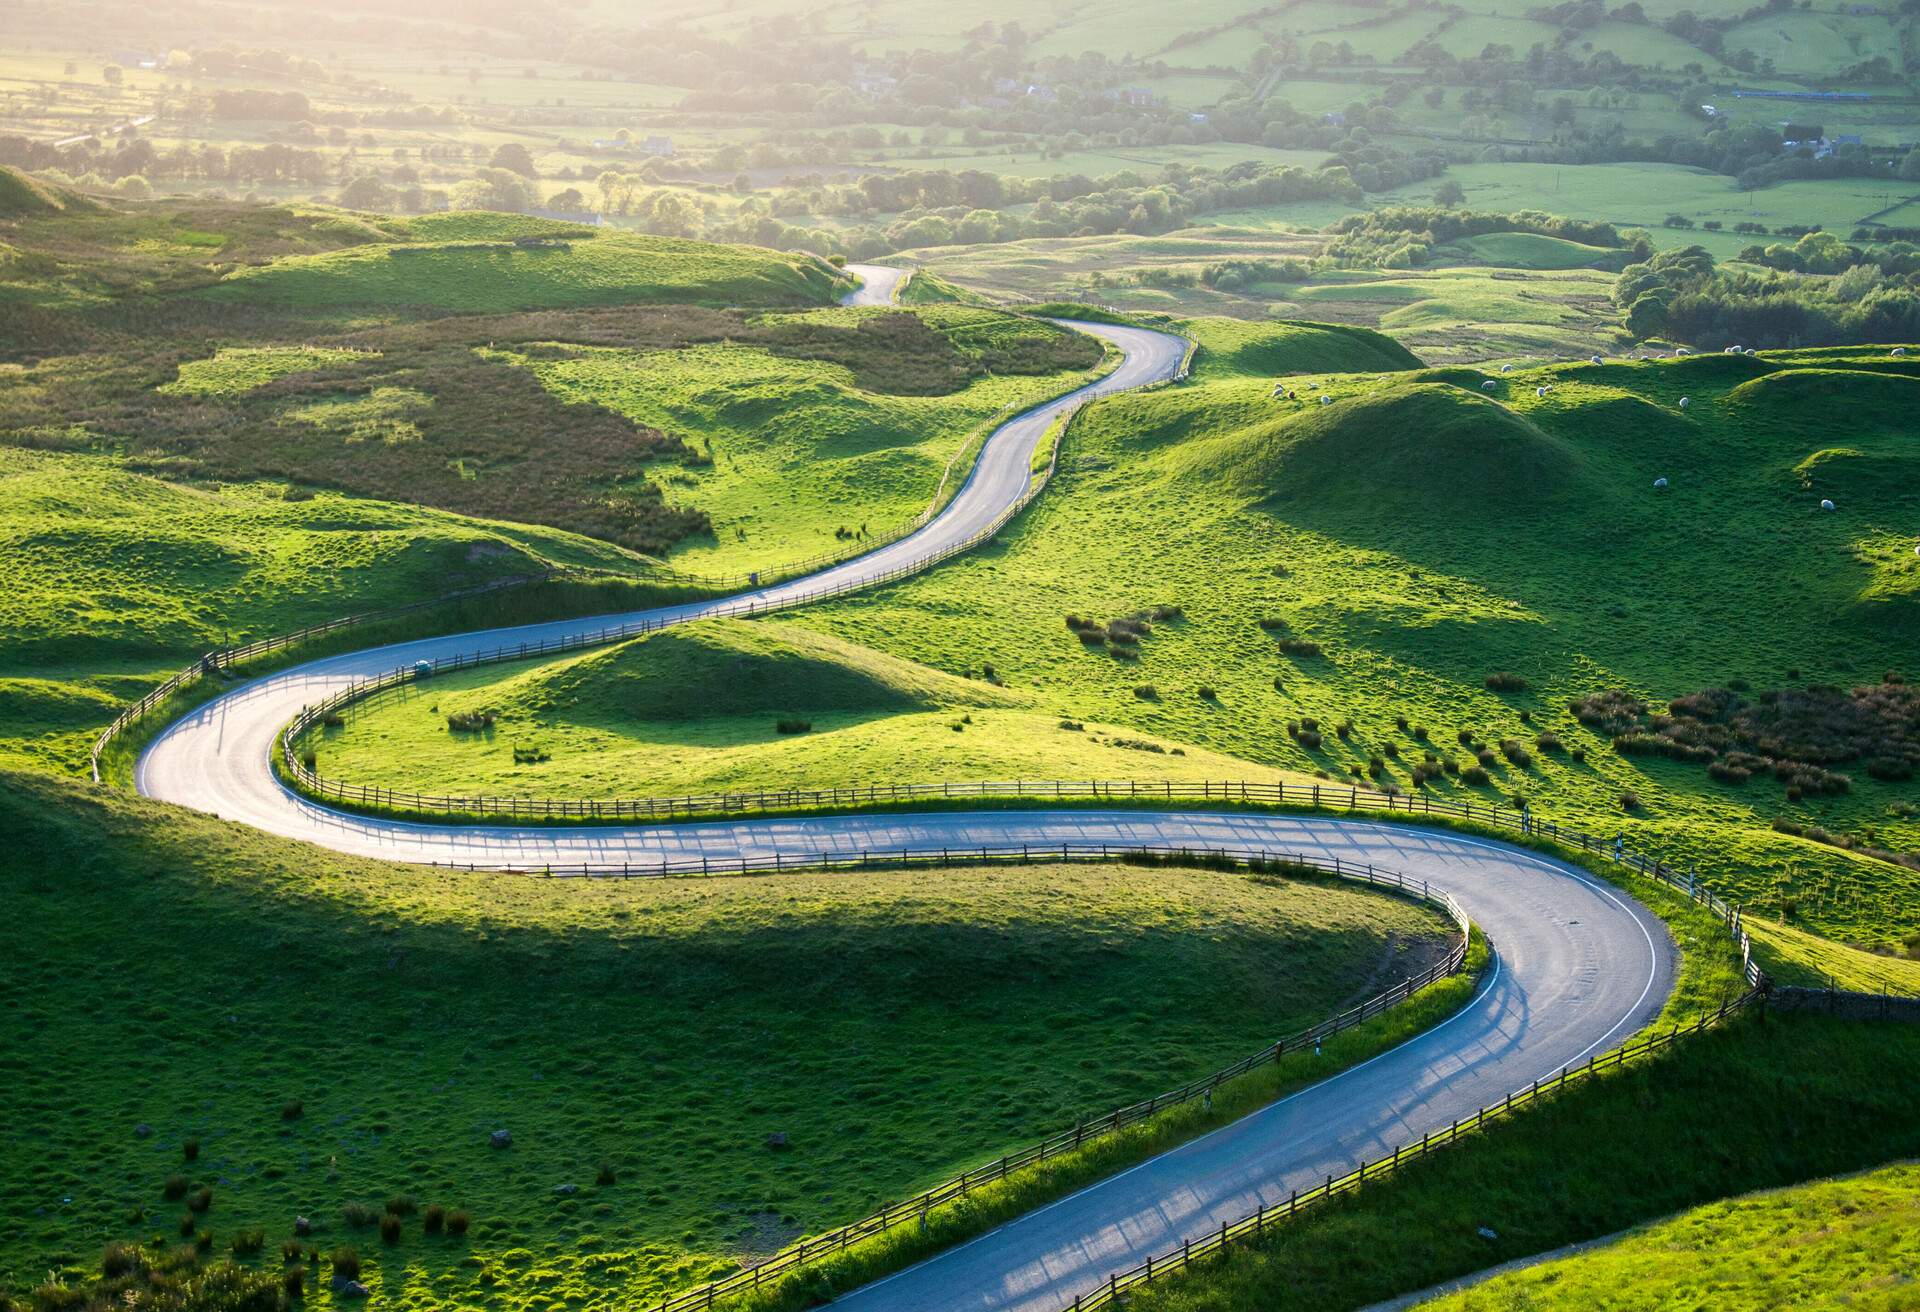 A winding road across the rolling hills covered in grass.